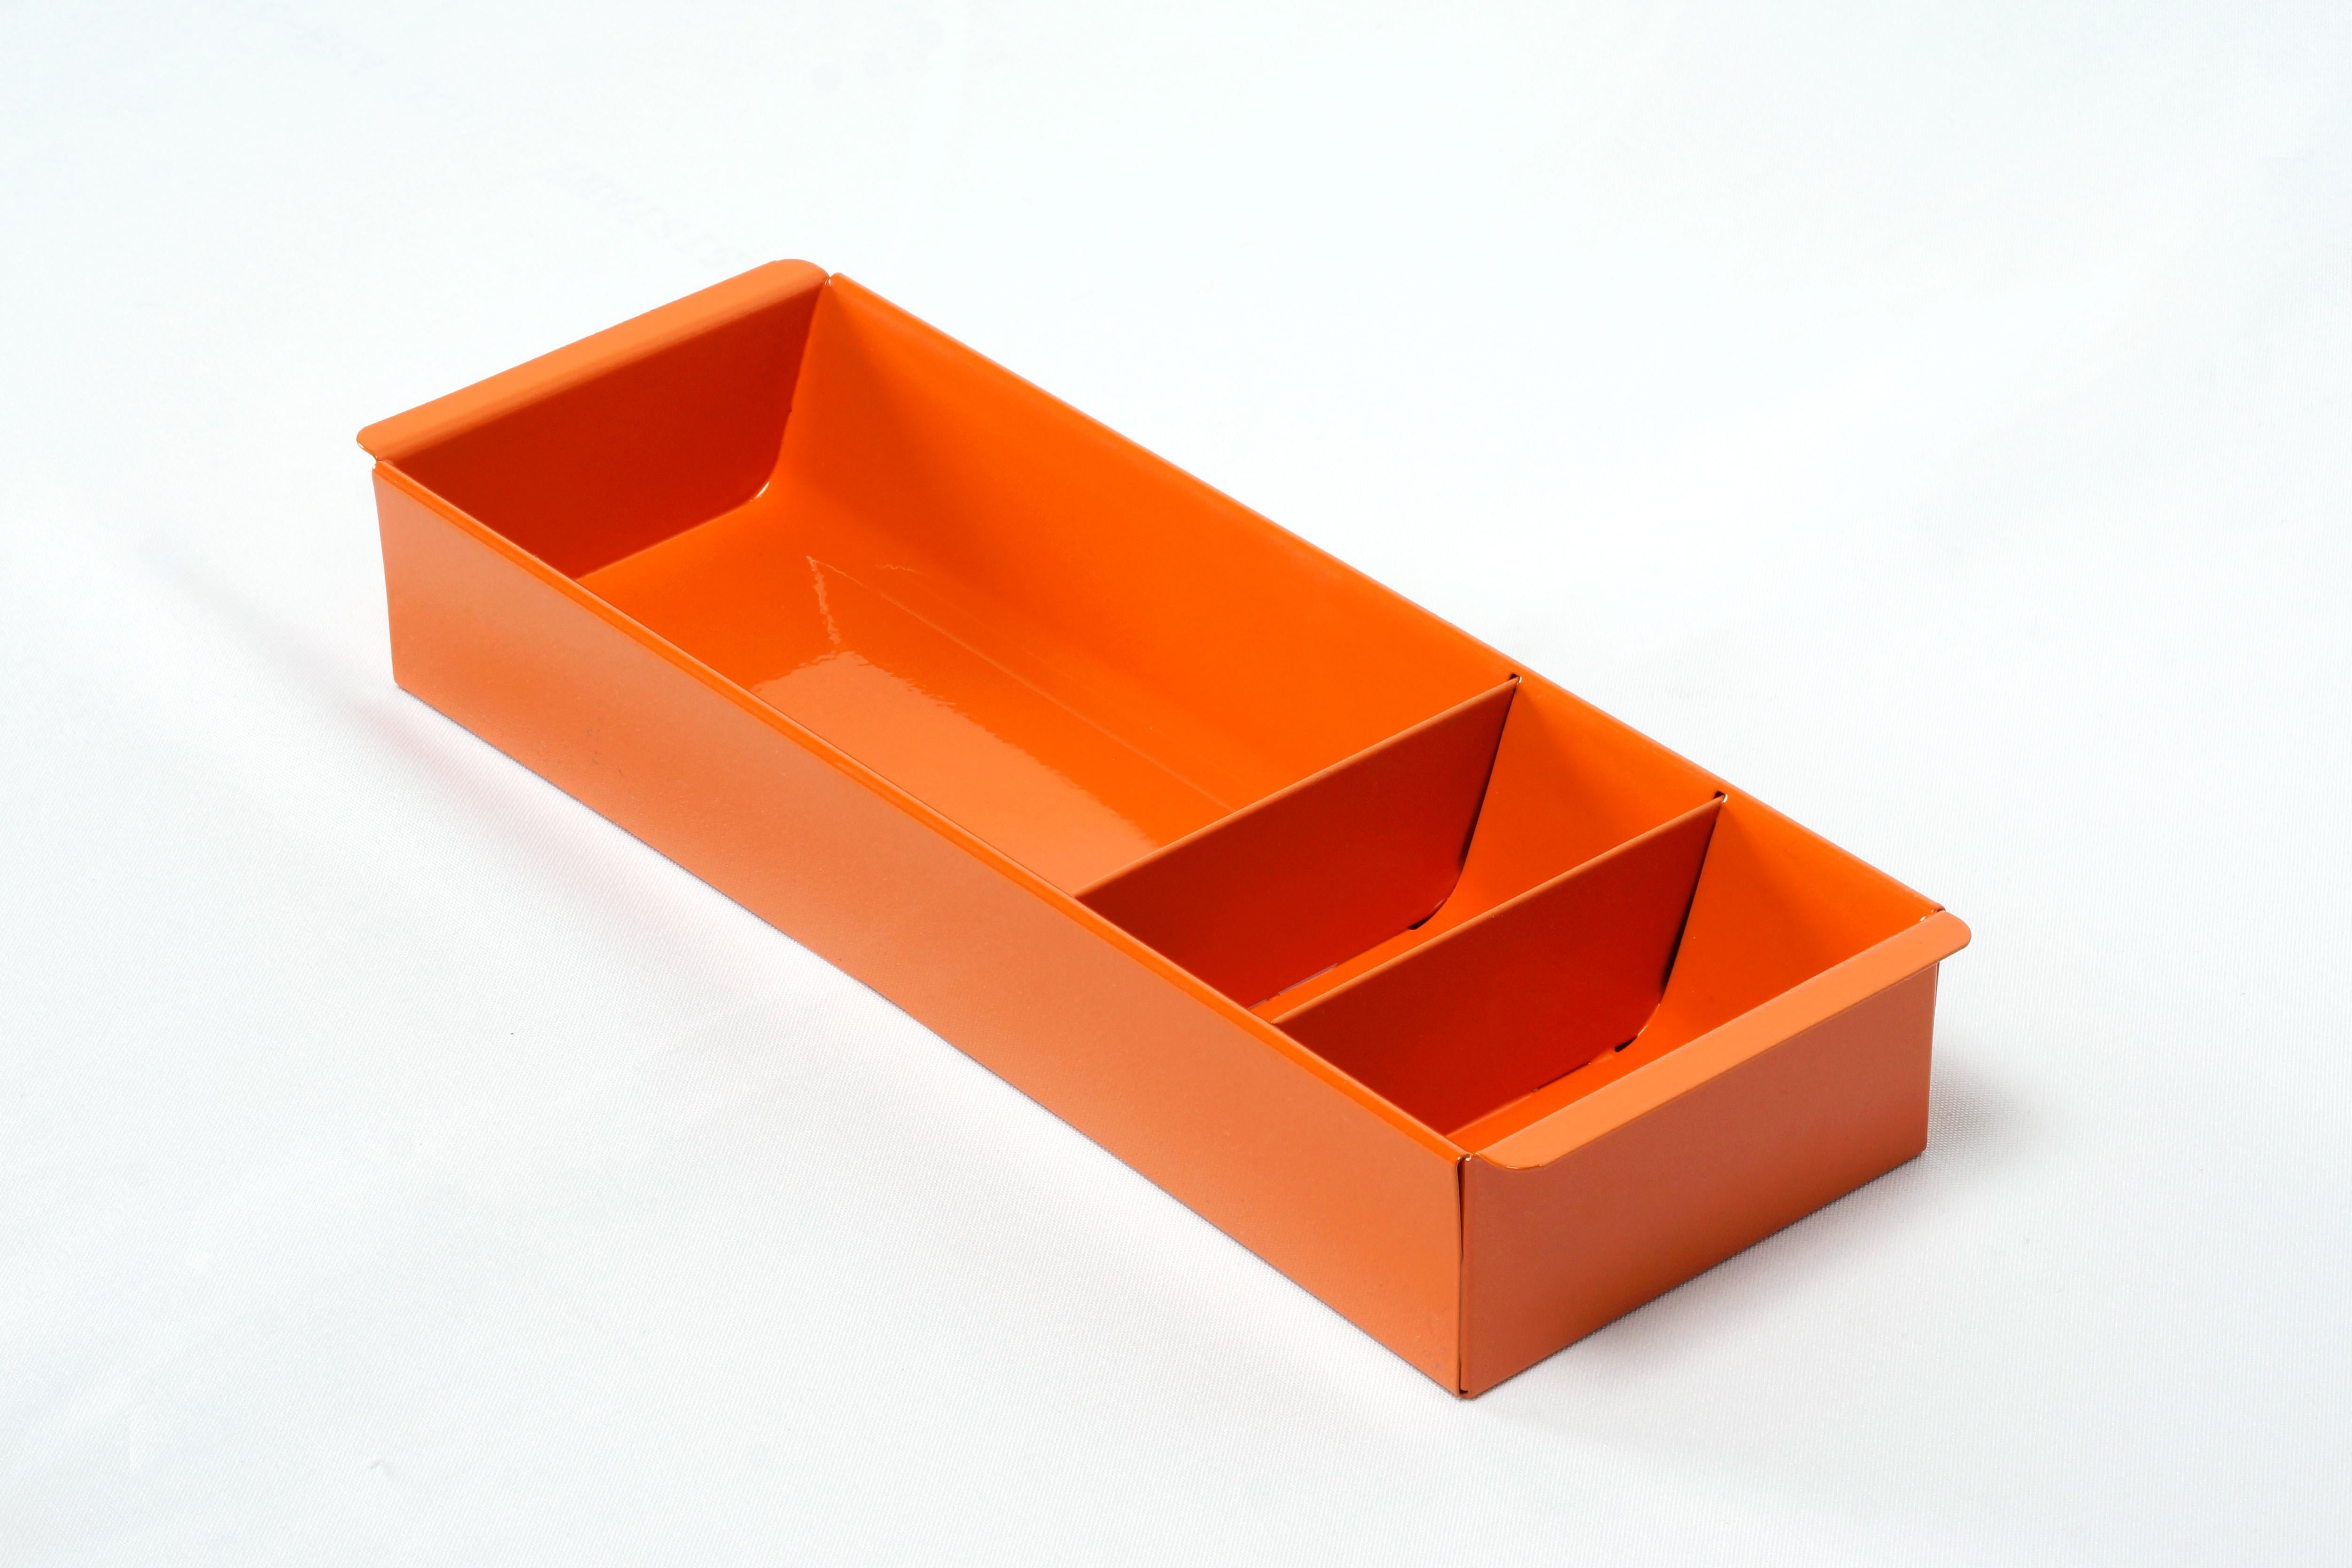 Once the insert to a classic tanker desk's utility drawer, we repurposed this neat industrial piece for use as a desktop organizer. Steel has been newly powder-coated in a pop of high gloss Tangerine (OG05). Features three slots, ideal for storing